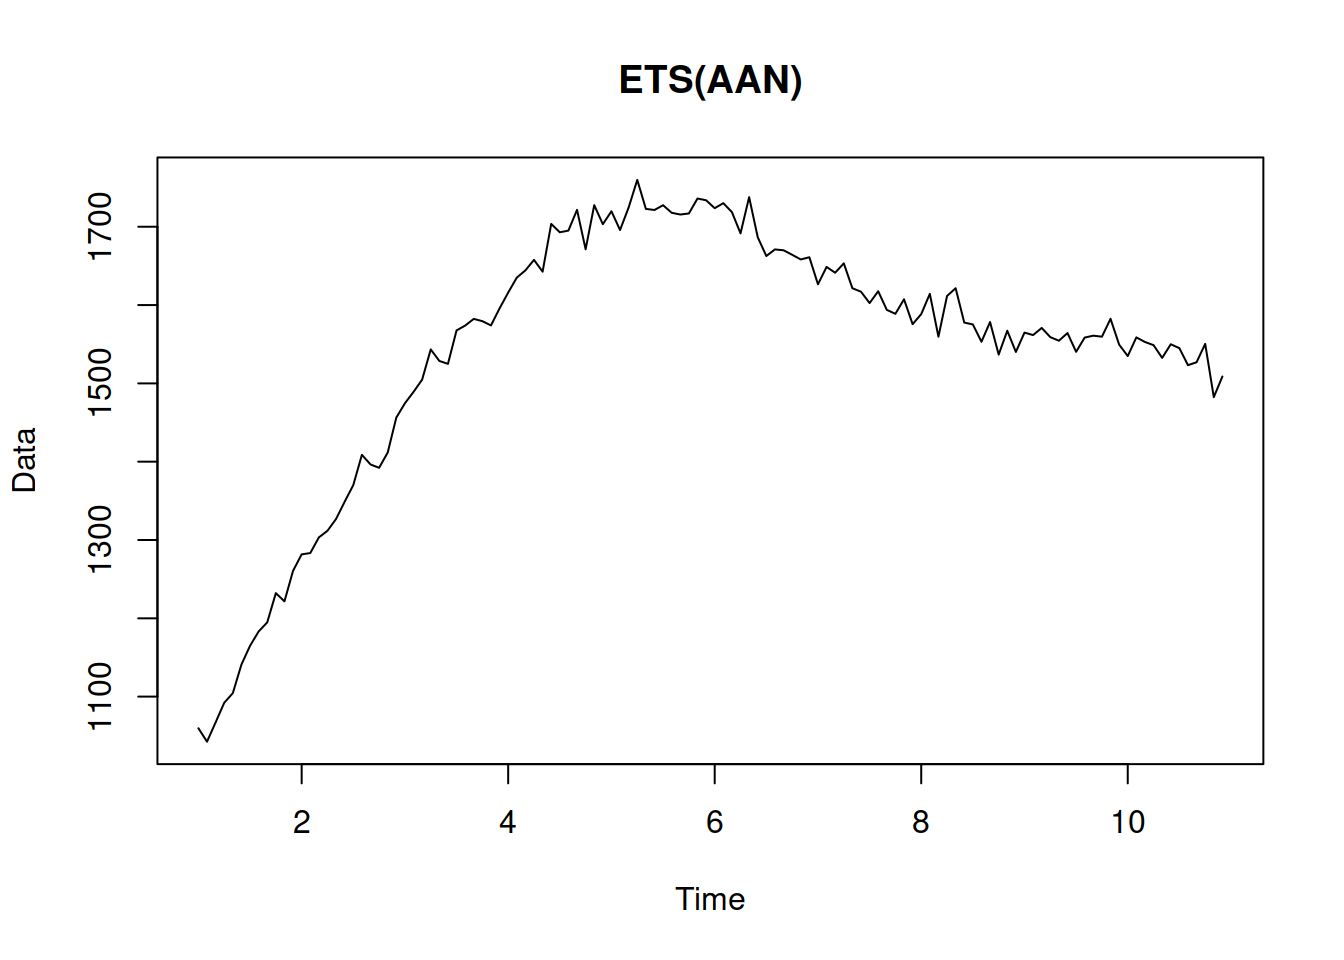 Data generated from an ETS(A,A,N) model.